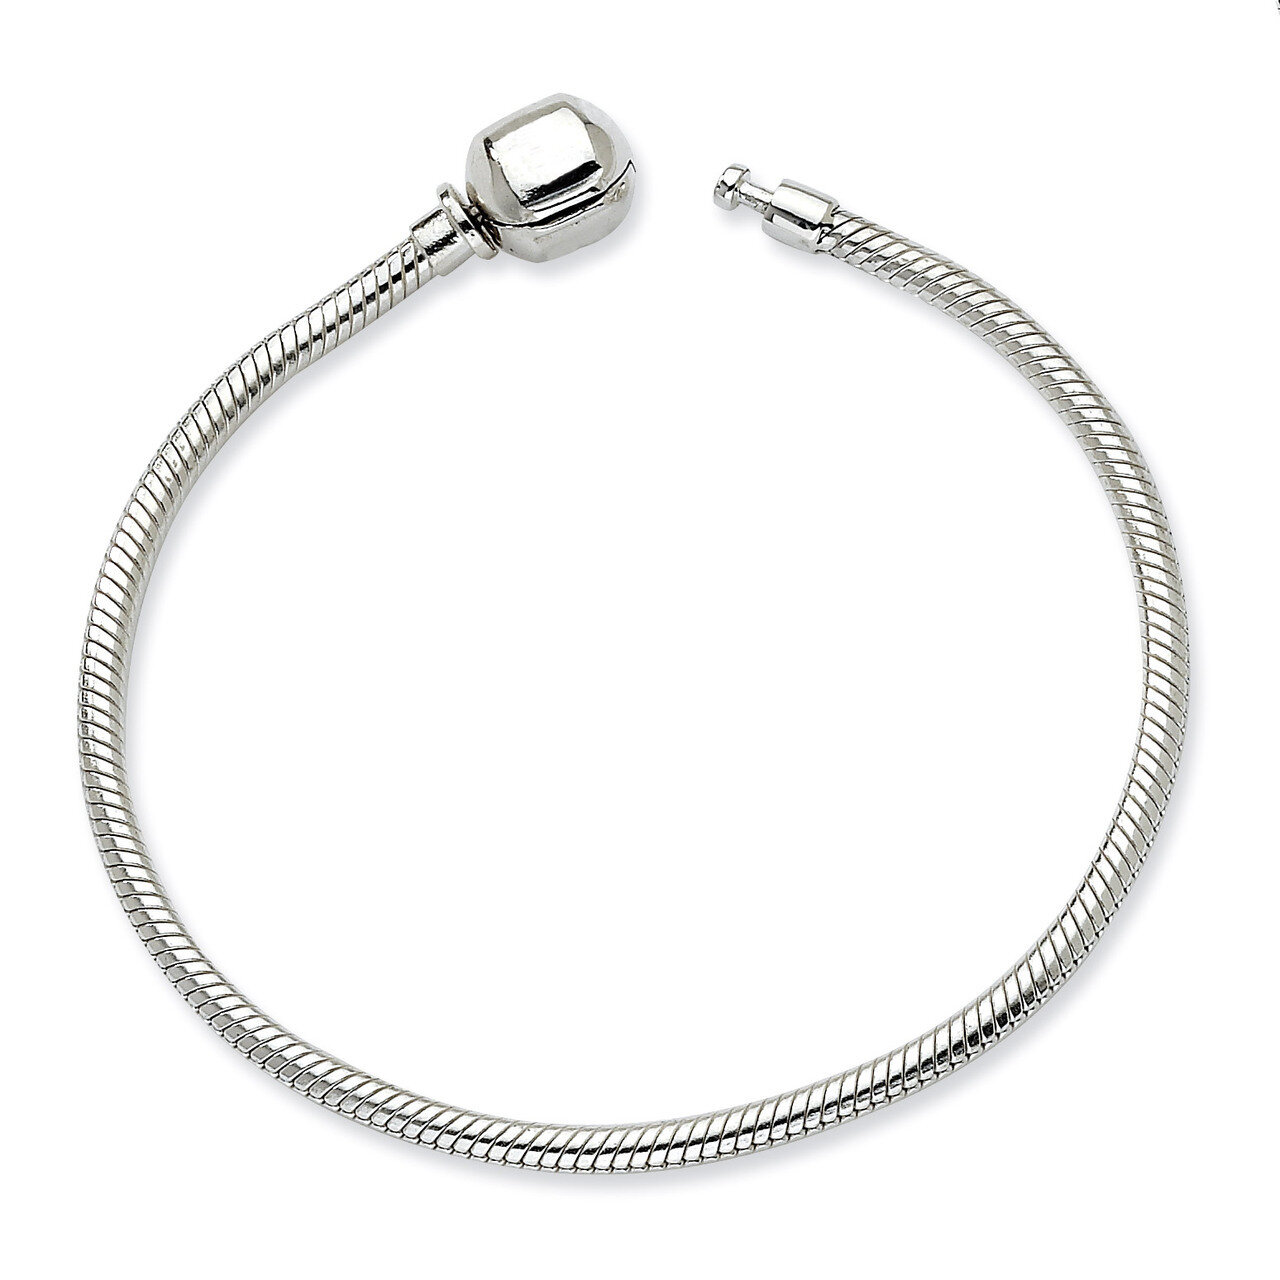 7.75 Inch Hinged Clasp Bead Bracelet - Sterling Silver QRS985-7.75